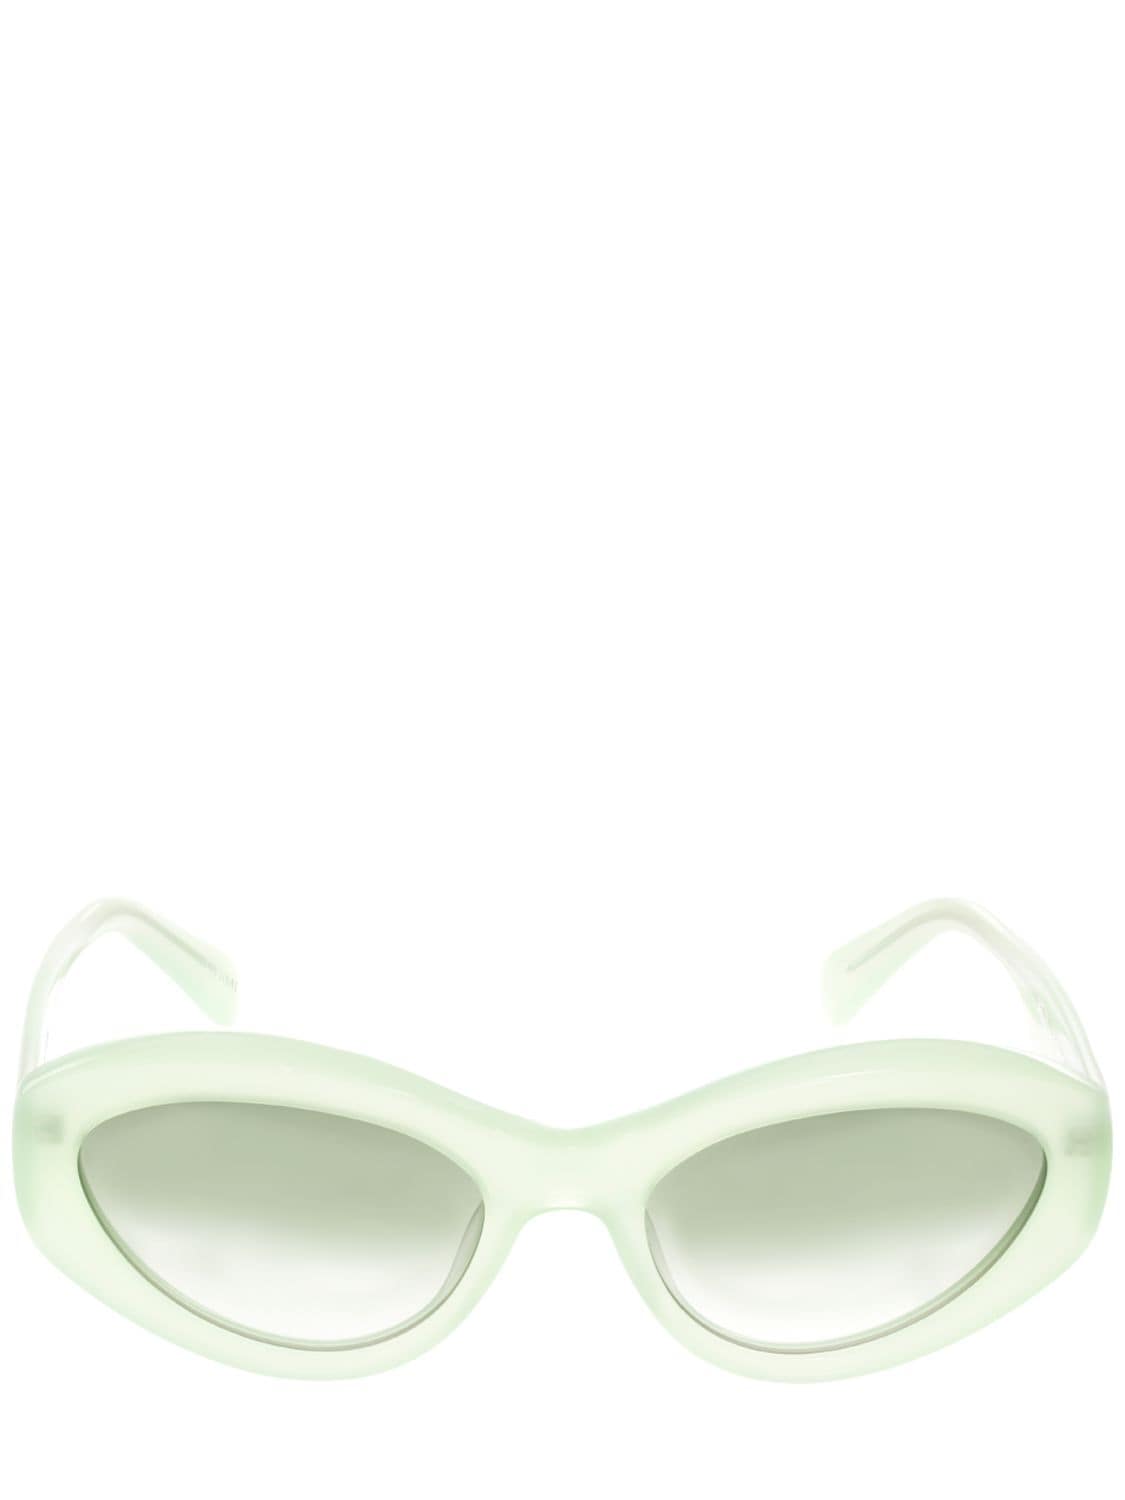 Chimi Lvr Exclusive 09 Cat-eye Sunglasses In Mint